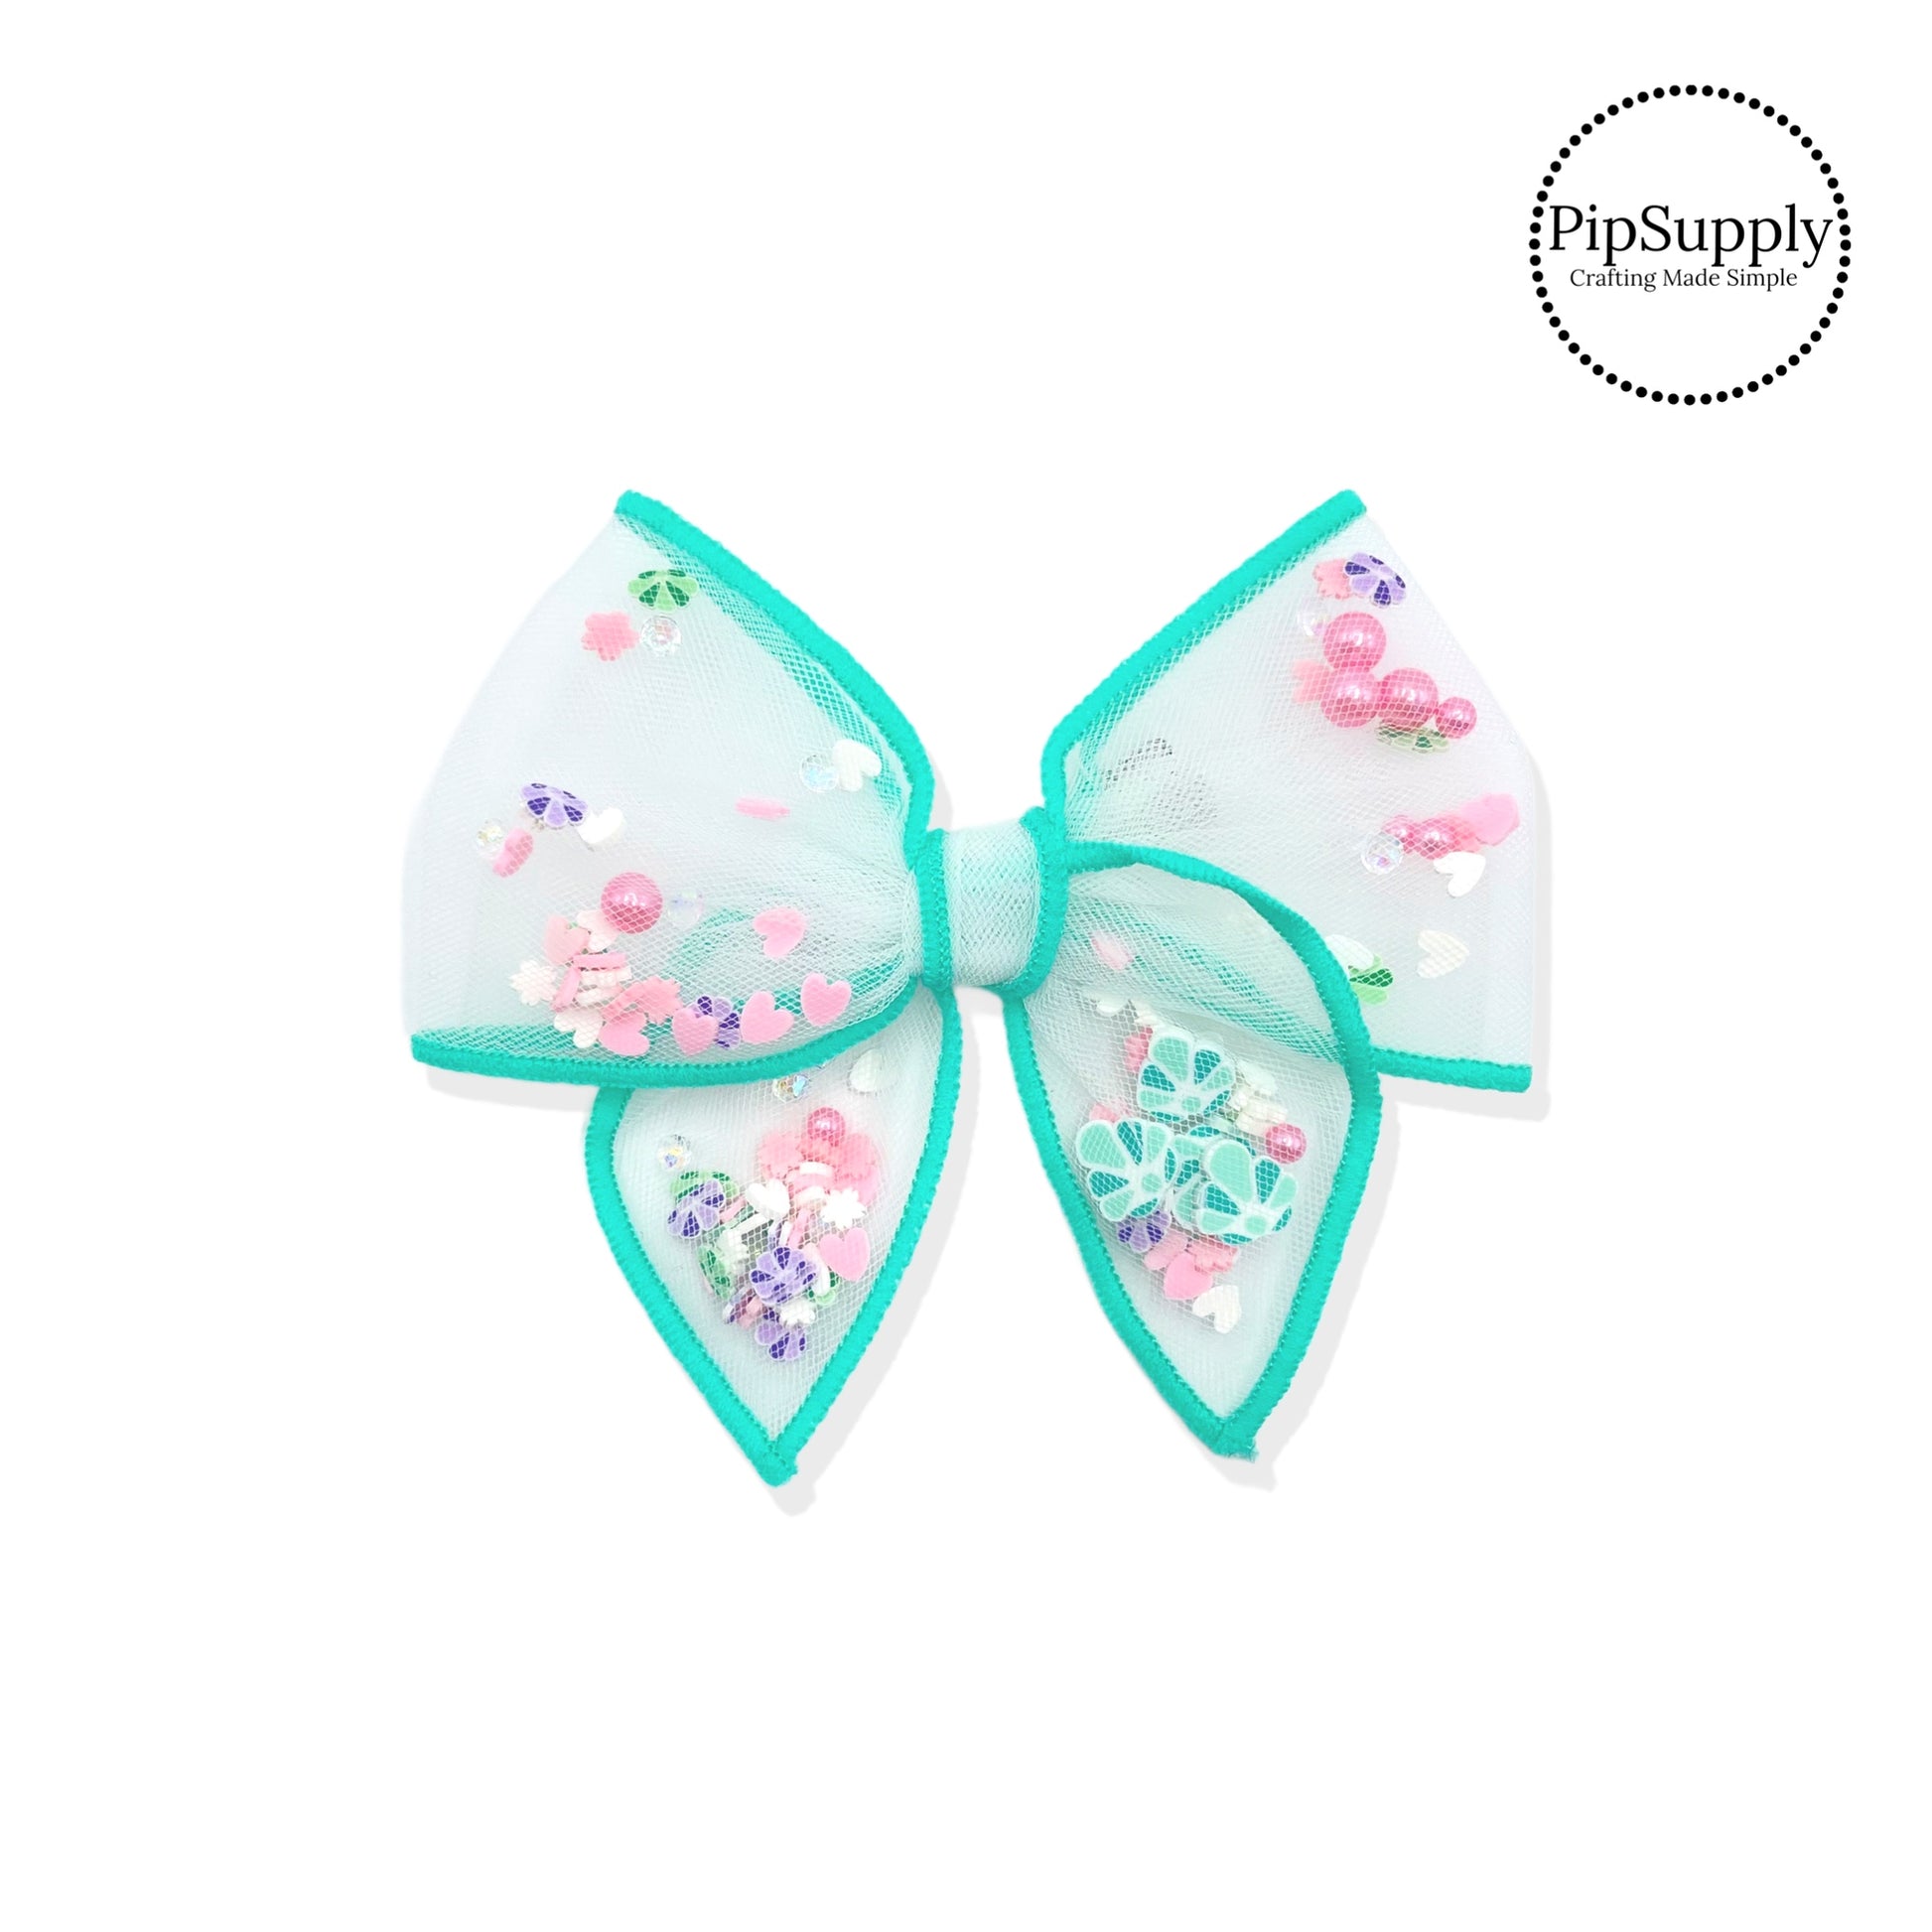 These teal stitched white tulle pre-cut shaker tied bows are ready to package and resell to your customers no sewing or measuring necessary! These hair bows come with a silver alligator clip already attached and come filled with shells, pearls, and sprinkles.